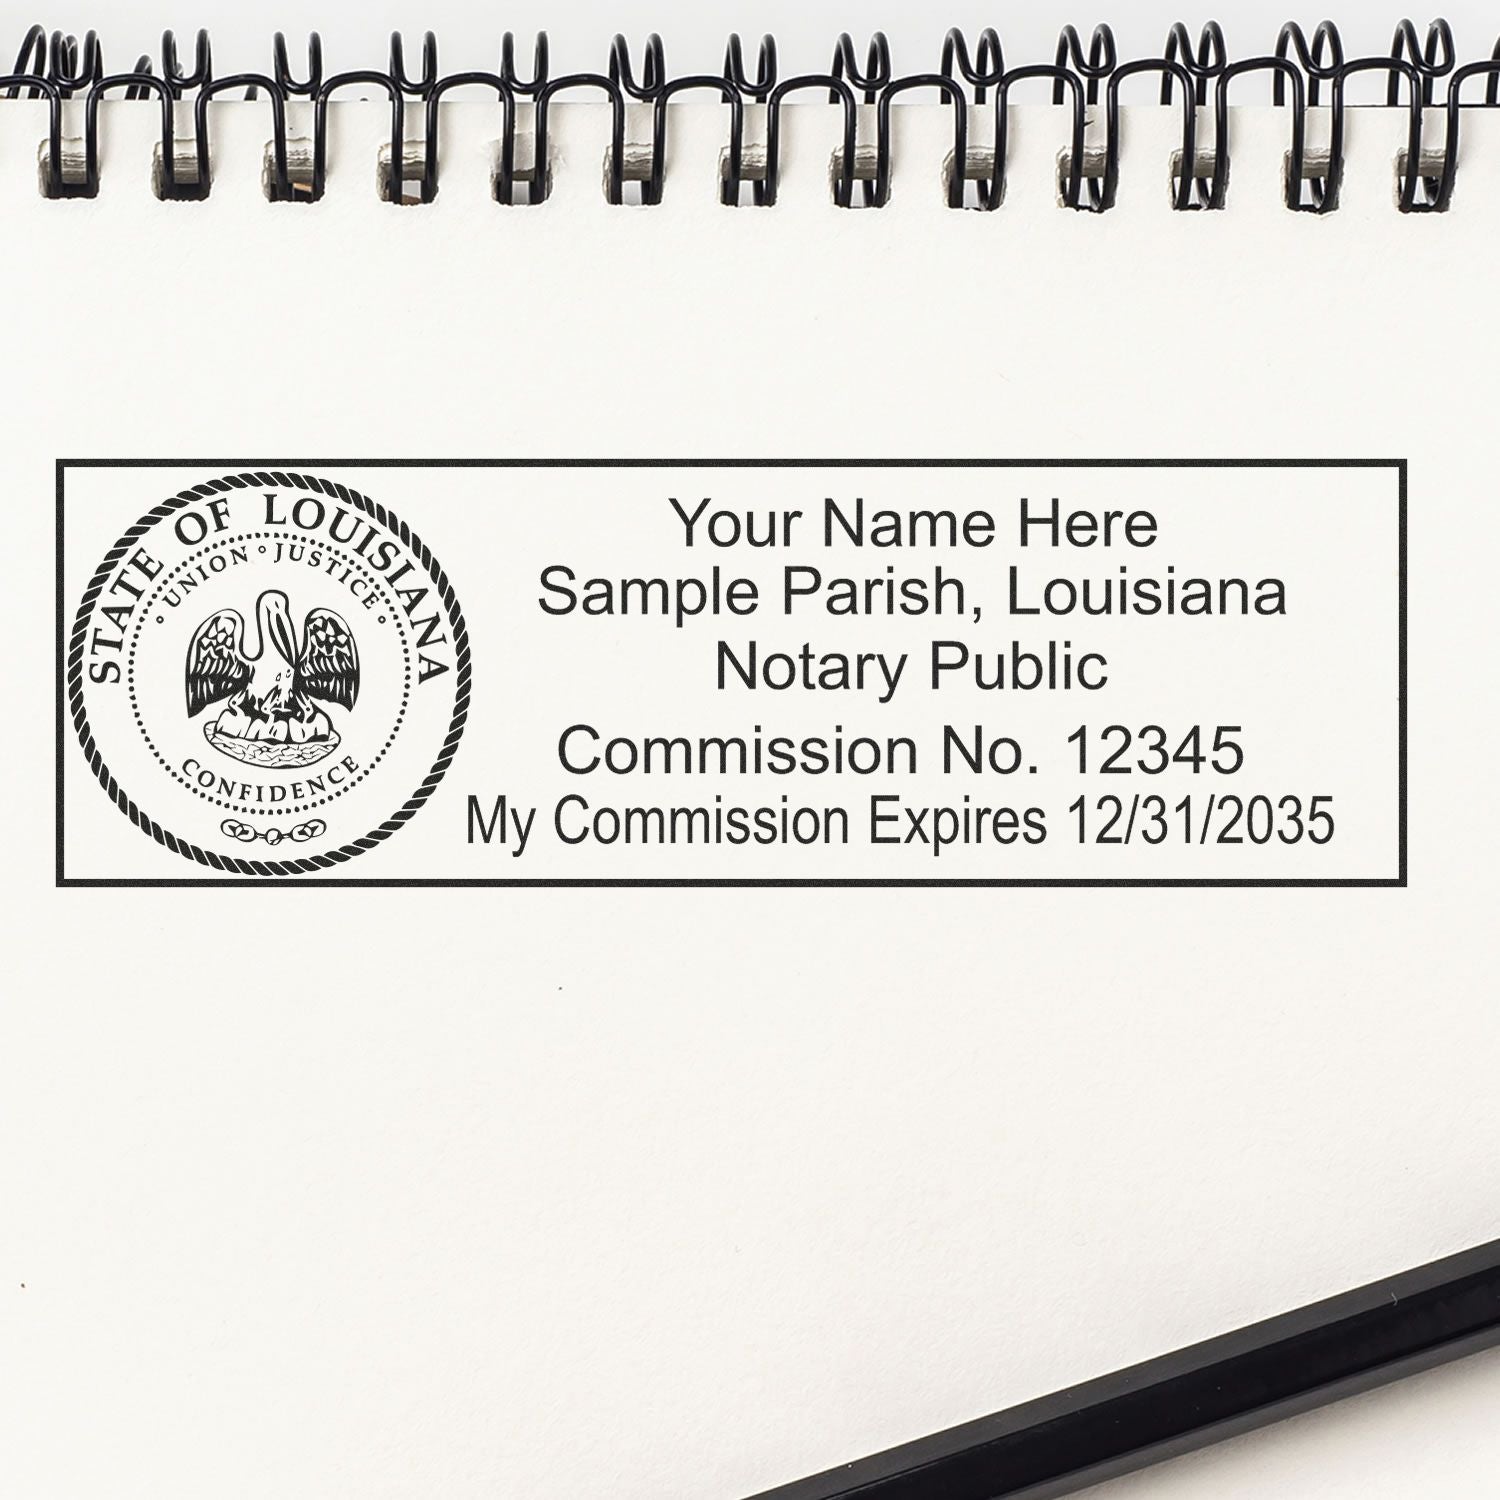 The main image for the Heavy-Duty Louisiana Rectangular Notary Stamp depicting a sample of the imprint and electronic files